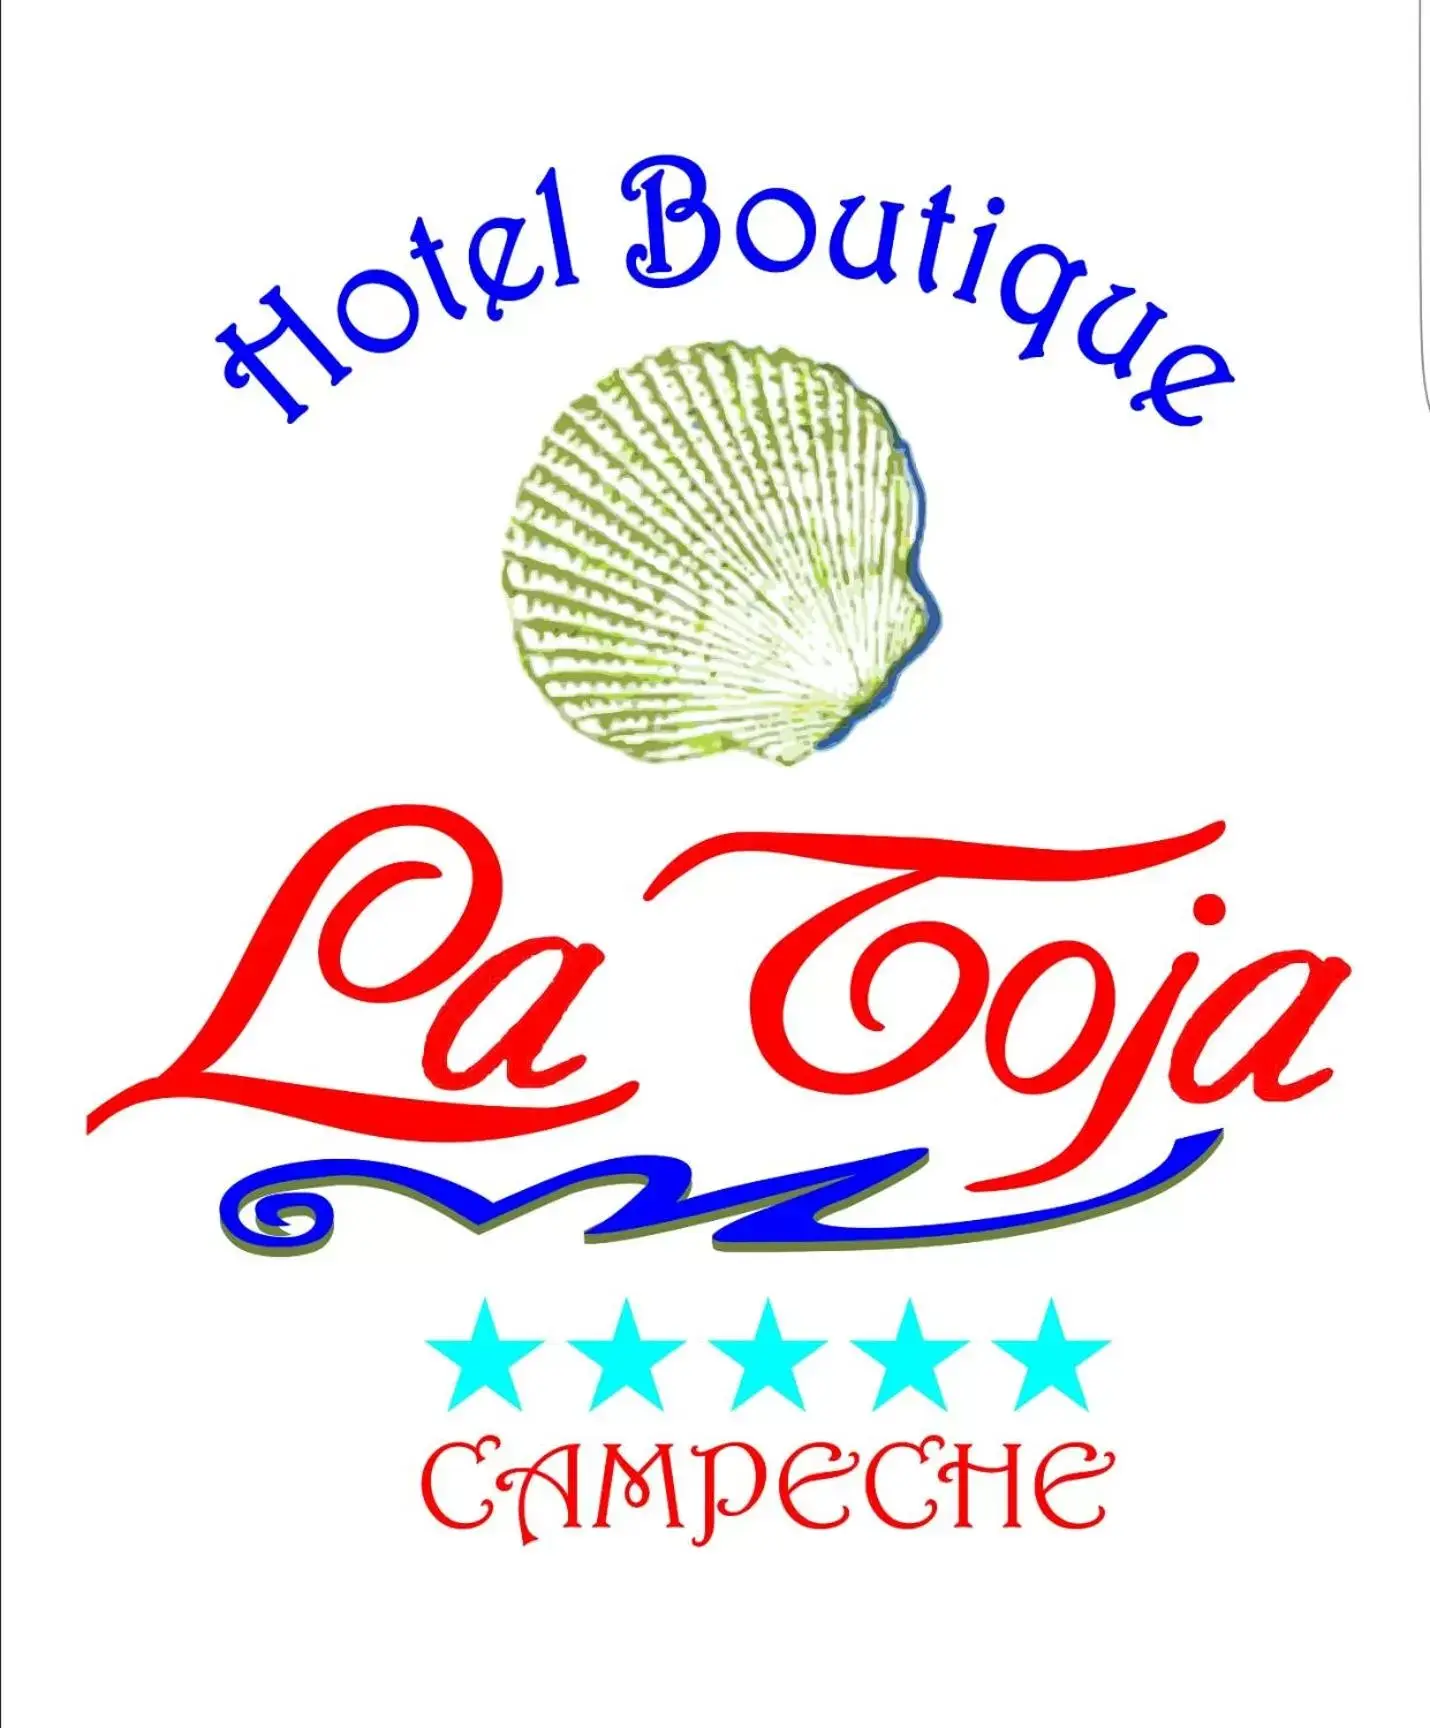 Property logo or sign, Property Logo/Sign in Hotel Boutique La Toja Campeche